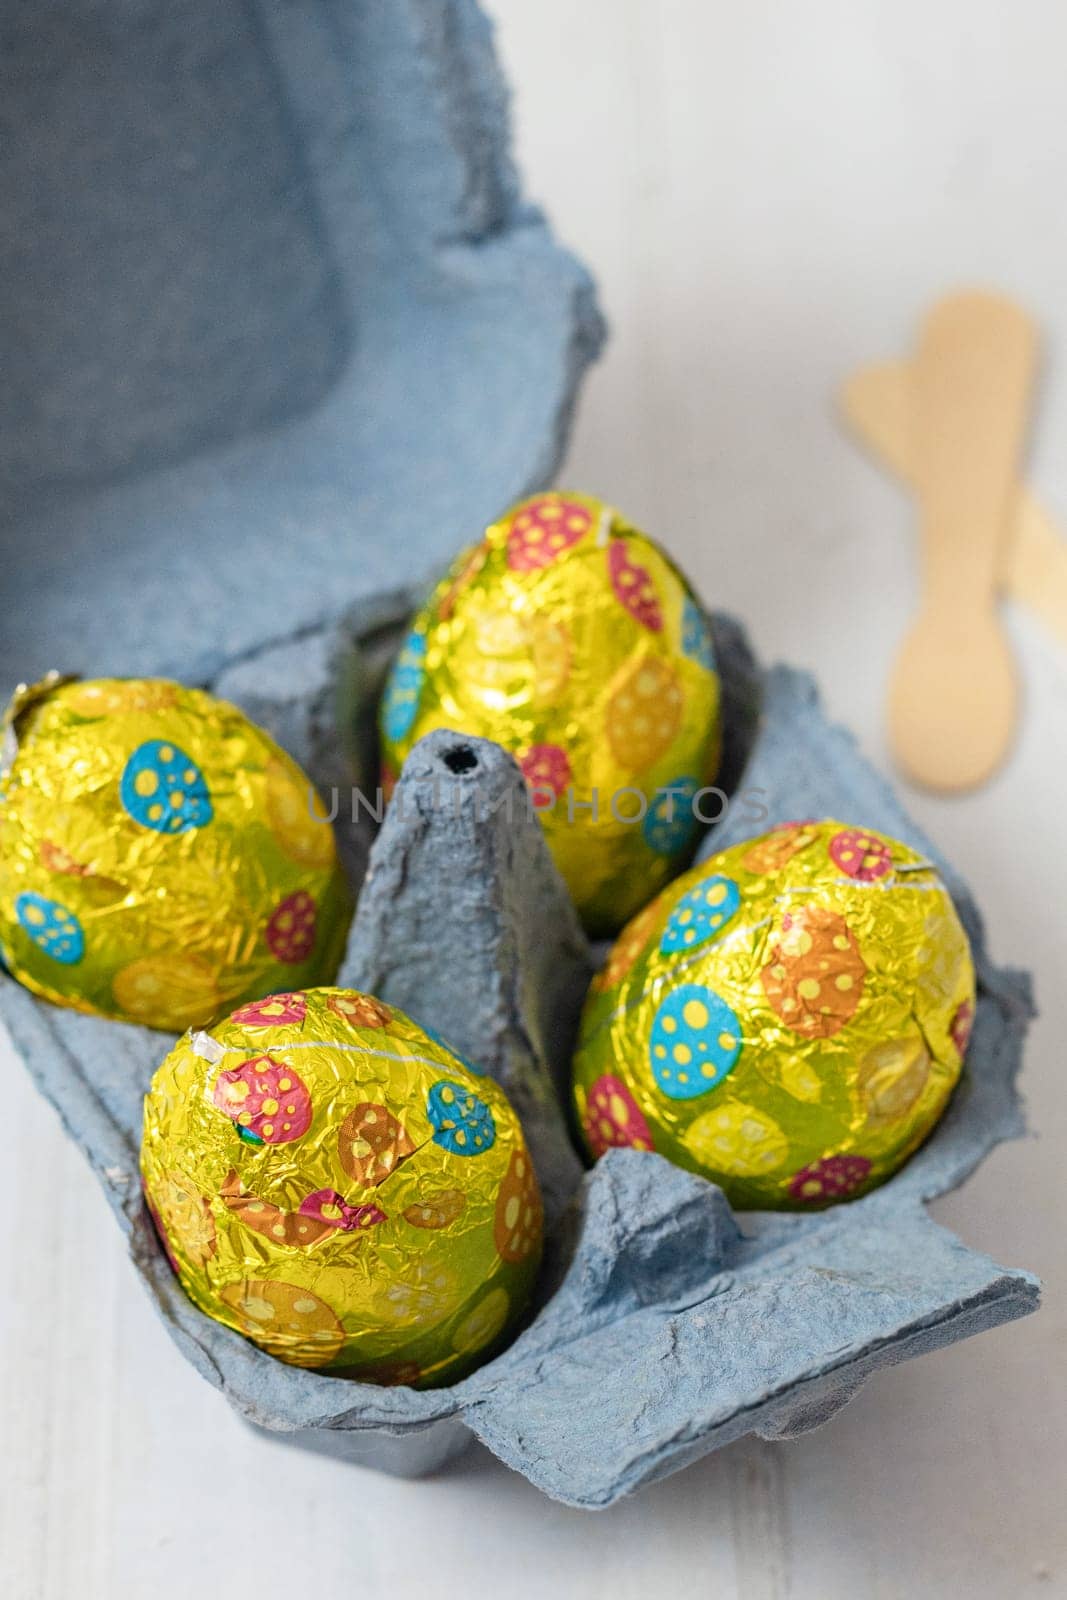 Four Easter eggs in shiny colorful wrappers in a blue egg carton box and two wooden spoons lie on a white wooden table, close-up side view.